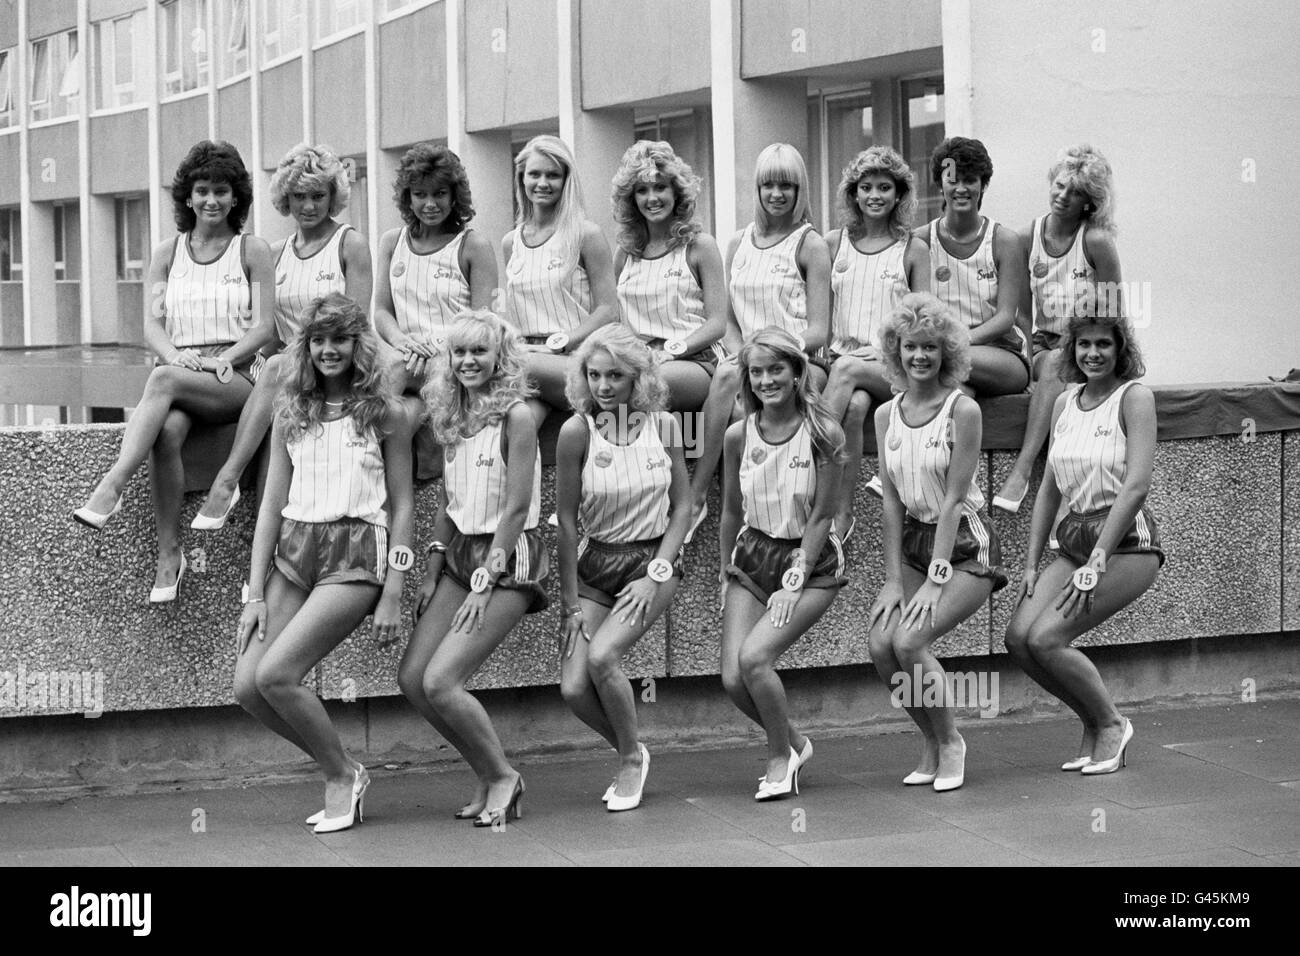 Final 15 of the United Kingdom contest line-up in London. Fromleft, back: Lesley-Anne Steele - Miss Blackpool; Lise Williams - Miss Caernarvon; Maria Rice-Mundy - Miss Chichester; Joanne Sedgley - Miss England; Linzi Butler - Miss Liverpool; Suzanne Younger (Miss Mold); Melanie Hoad - Miss Newhaven; Karen Duncan - Miss Northern Ireland; and Jacqueline Brookes - Miss Nottingham. Front row: Victoria Ellis - Miss Oldham; Carolyn Hodgson - Miss Scarborough; Natalie Devlin - Miss Scotland; Gillian Bell - Miss Southport; Tracey Rowlands - Miss Wales and Alison Slack - Miss Worksop. Stock Photo